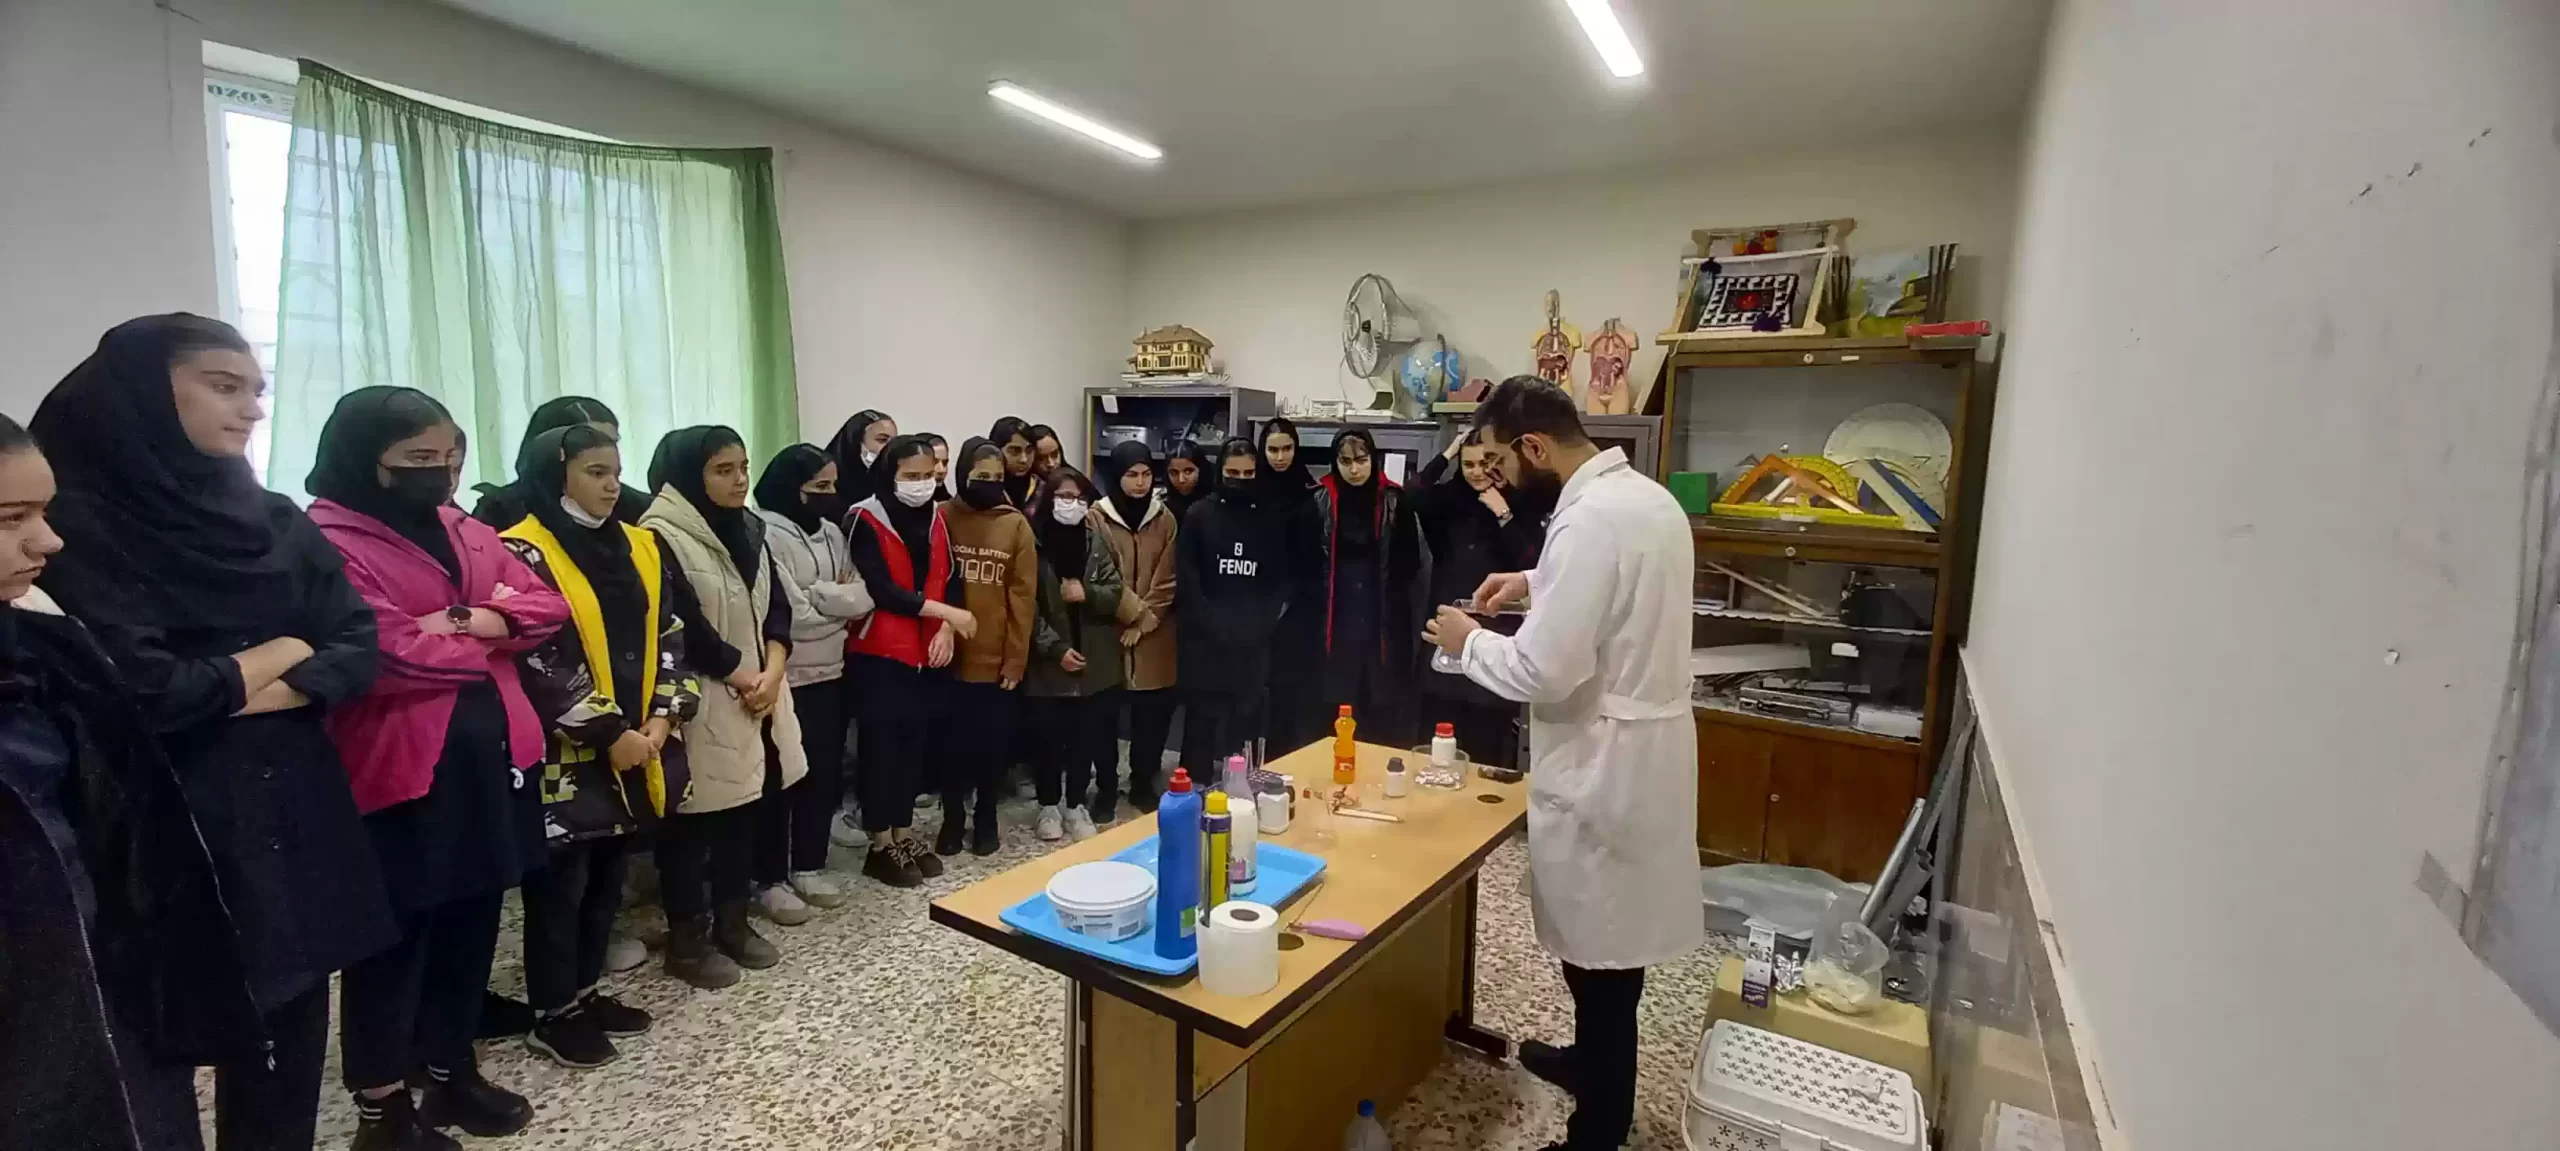 Students benefiting from IASBS Science Ambassadors project exceed 3,000